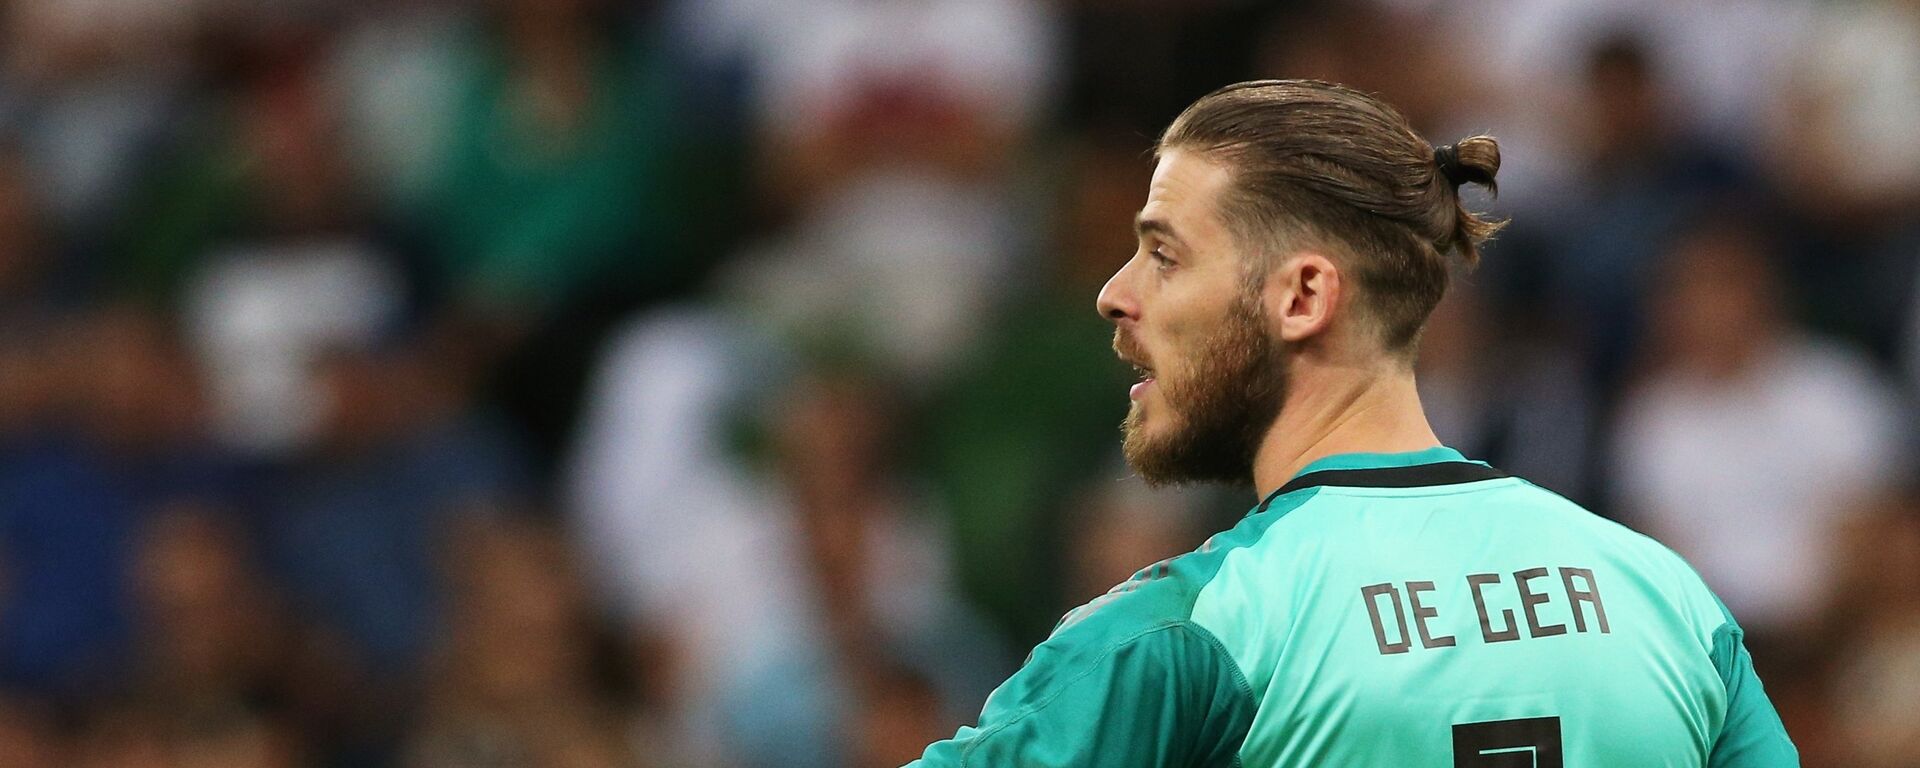 Spain's goalkeeper David de Gea points during a friendly match between Tunisia's and Spain's national soccer teams ahead of the World Cup in Krasnodar, Russia, June 9, 2018 - اسپوتنیک افغانستان  , 1920, 04.04.2021